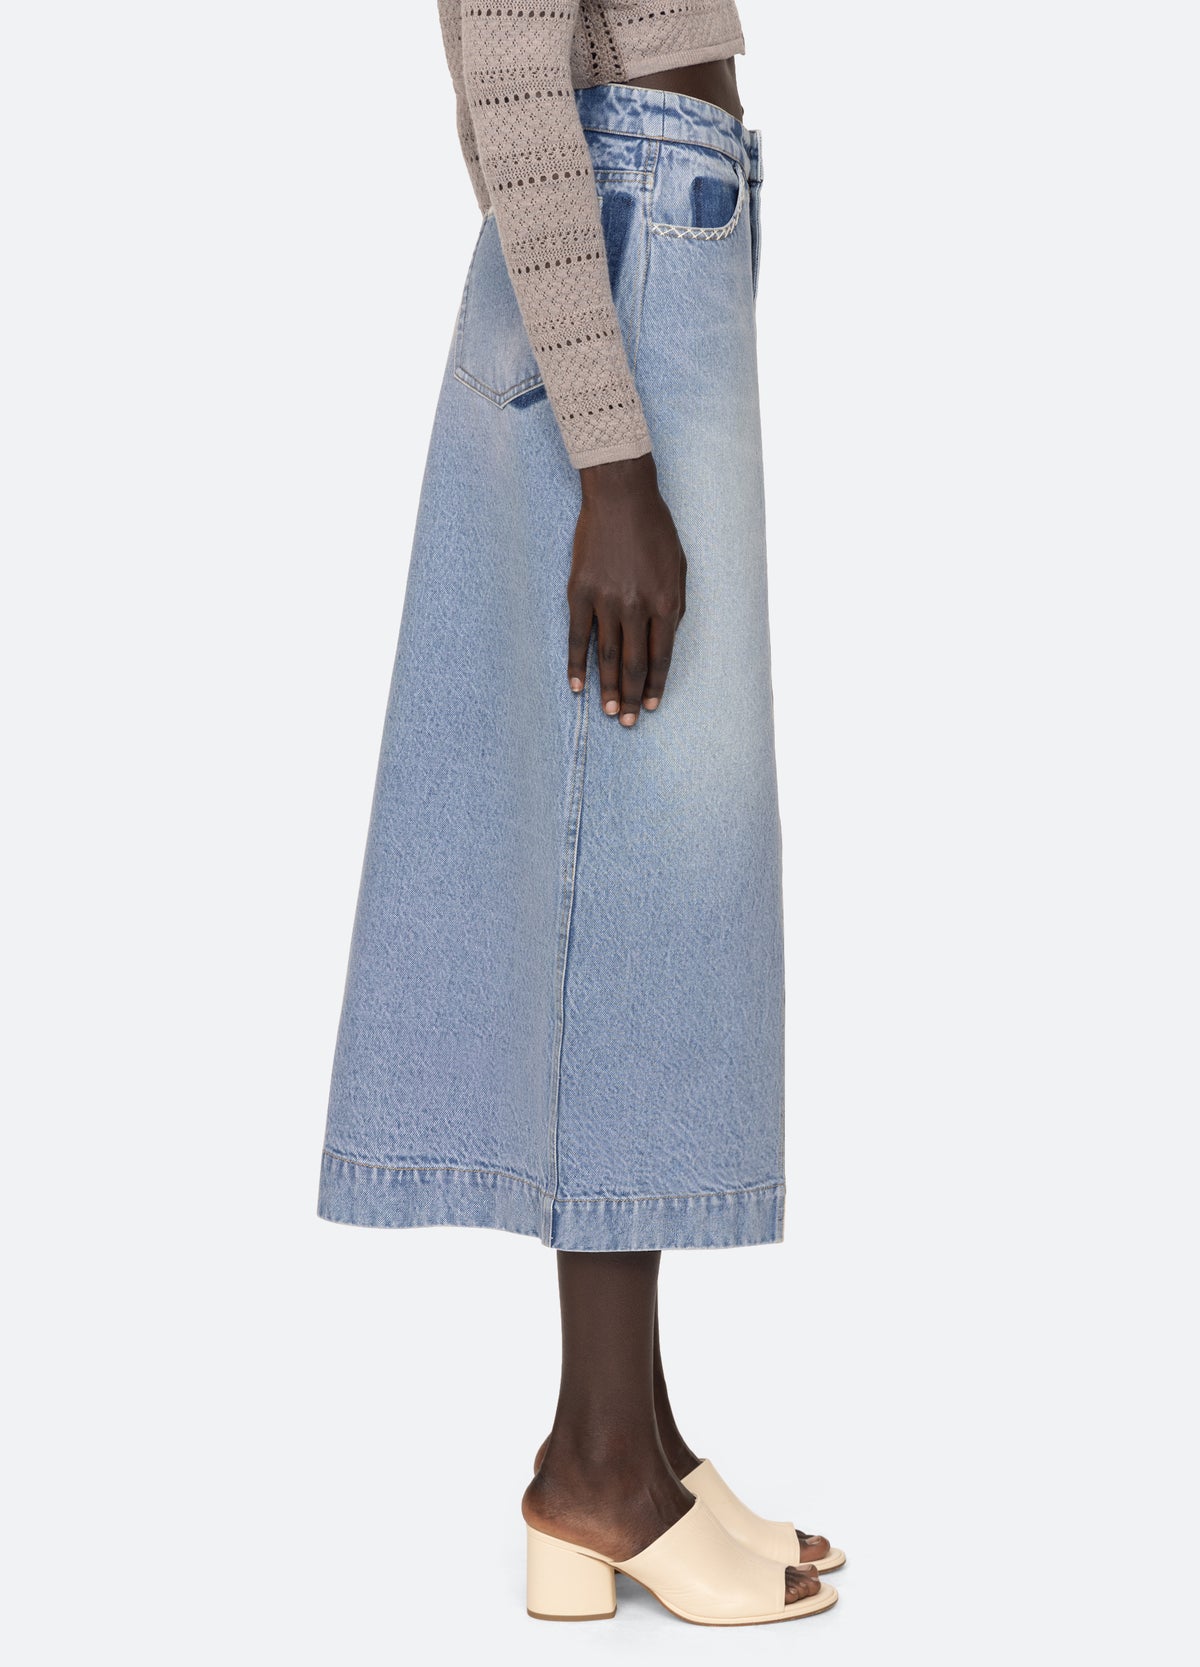 blue-marion skirt-side view - 4